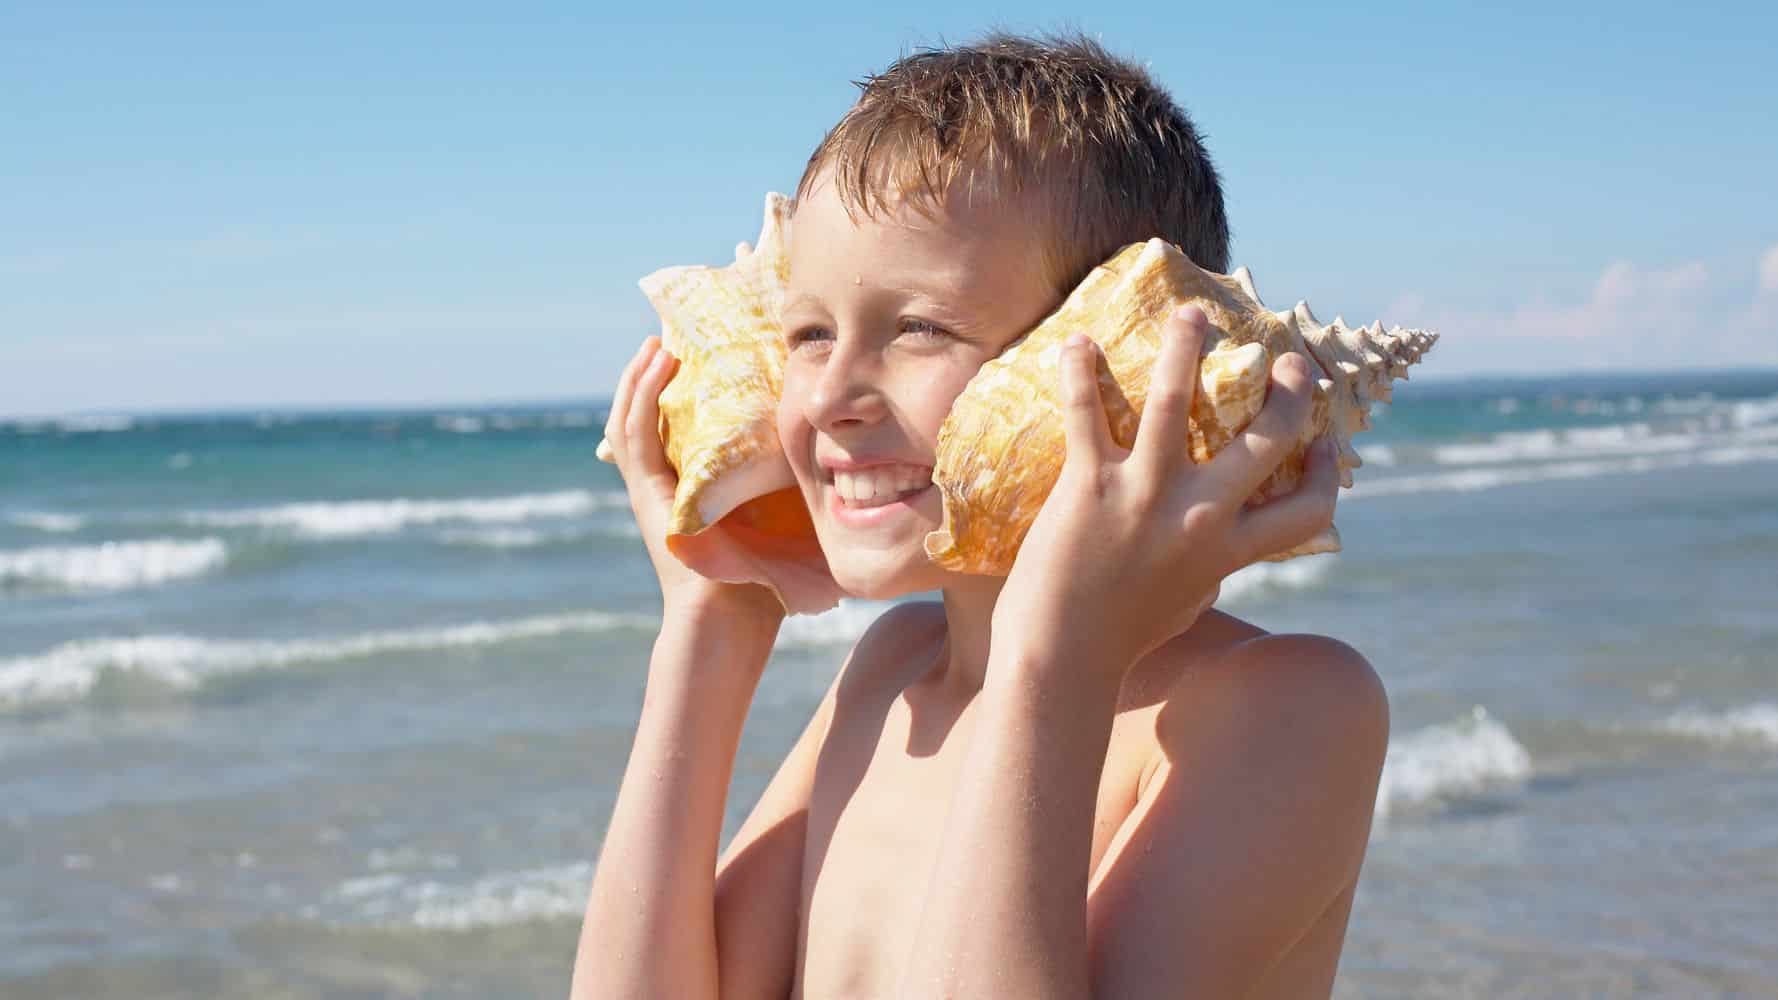 Why Can You Hear The Ocean When You Put A Seashell To Your Ear?